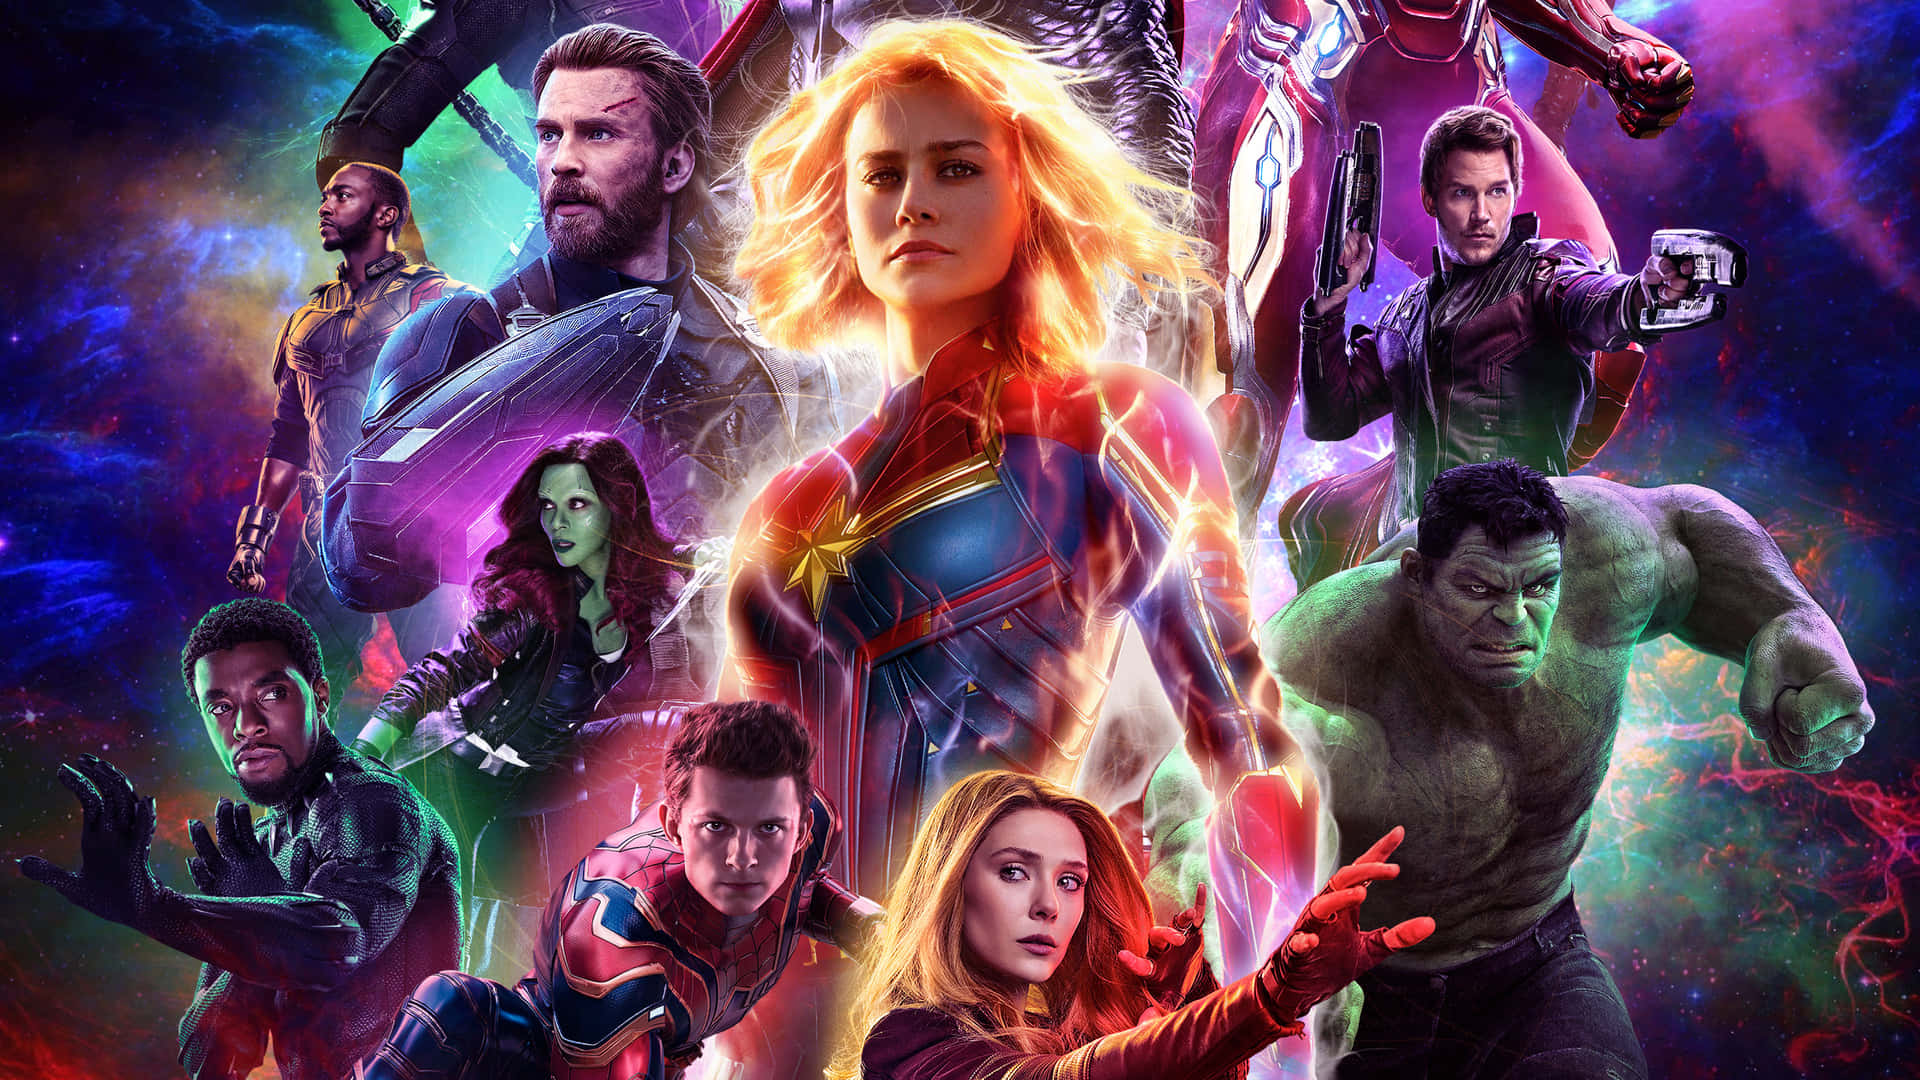 Heroes and Villains of the Marvel Universe Unite for the Epic Finale of Avengers Endgame